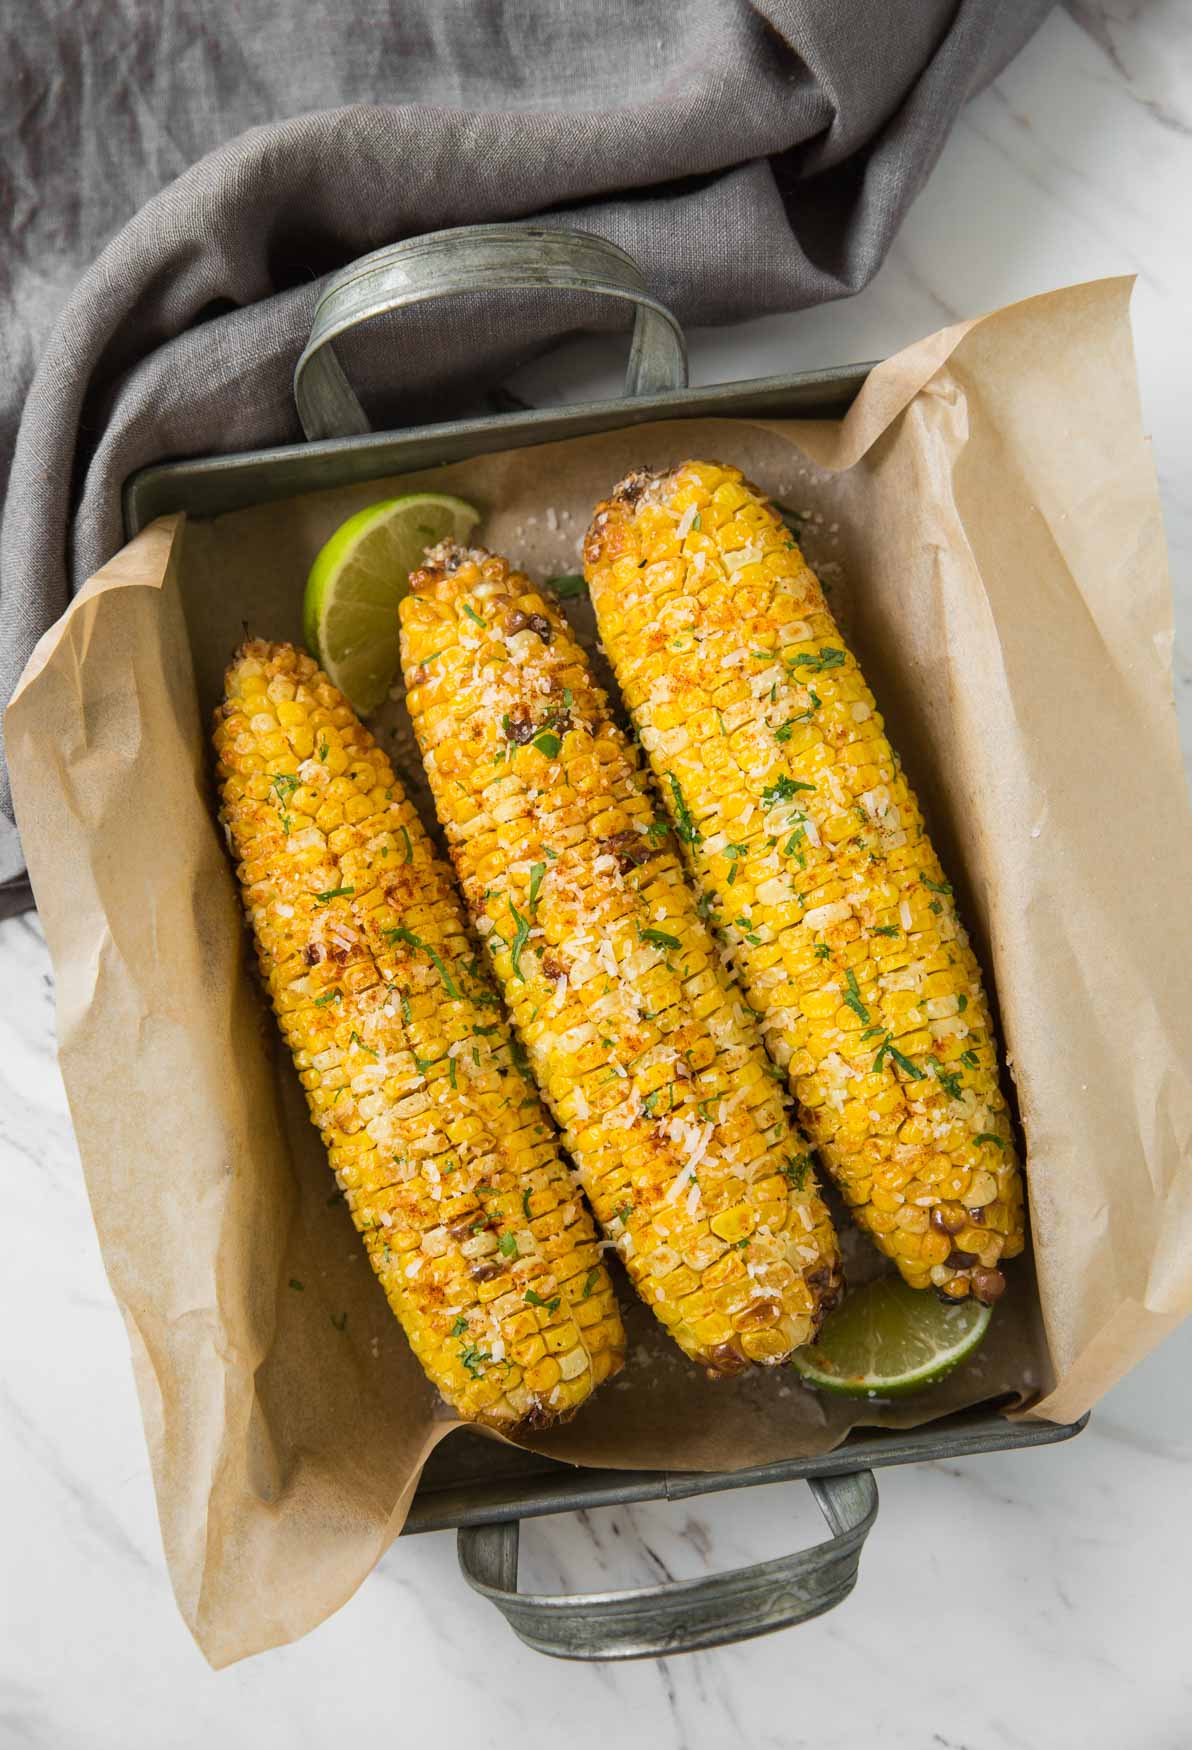 Under 15 mins. make this quick and easy Air fryer corn whenever you need roasted corn.